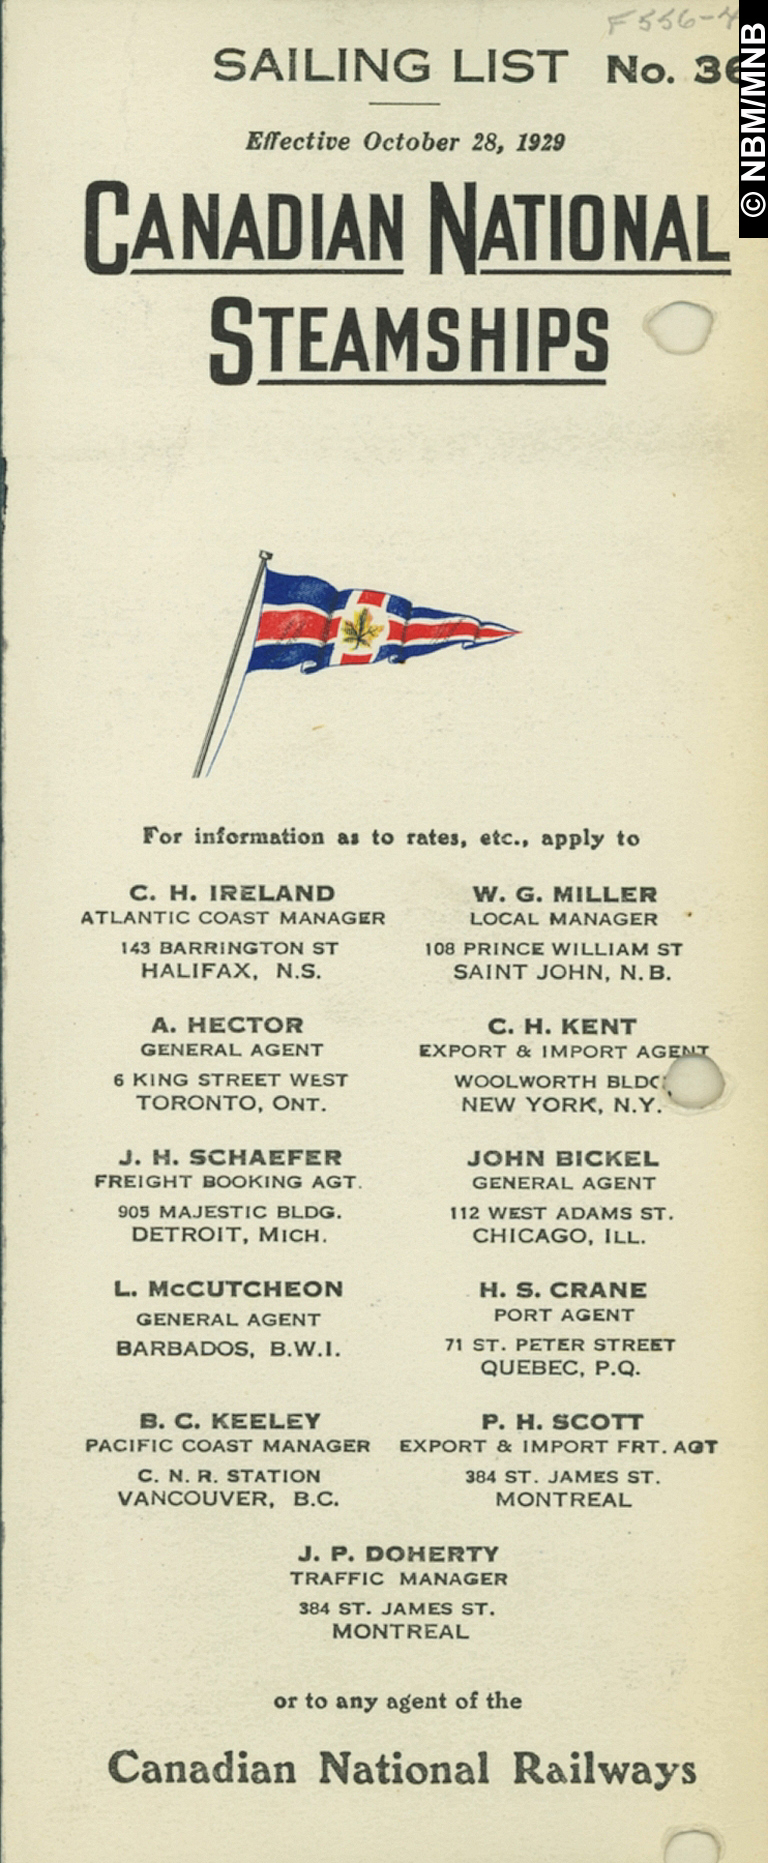 Canadian National Steamships, Sailing List, Atlantic Services from Saint John, N.B. and Halifax, N.S.